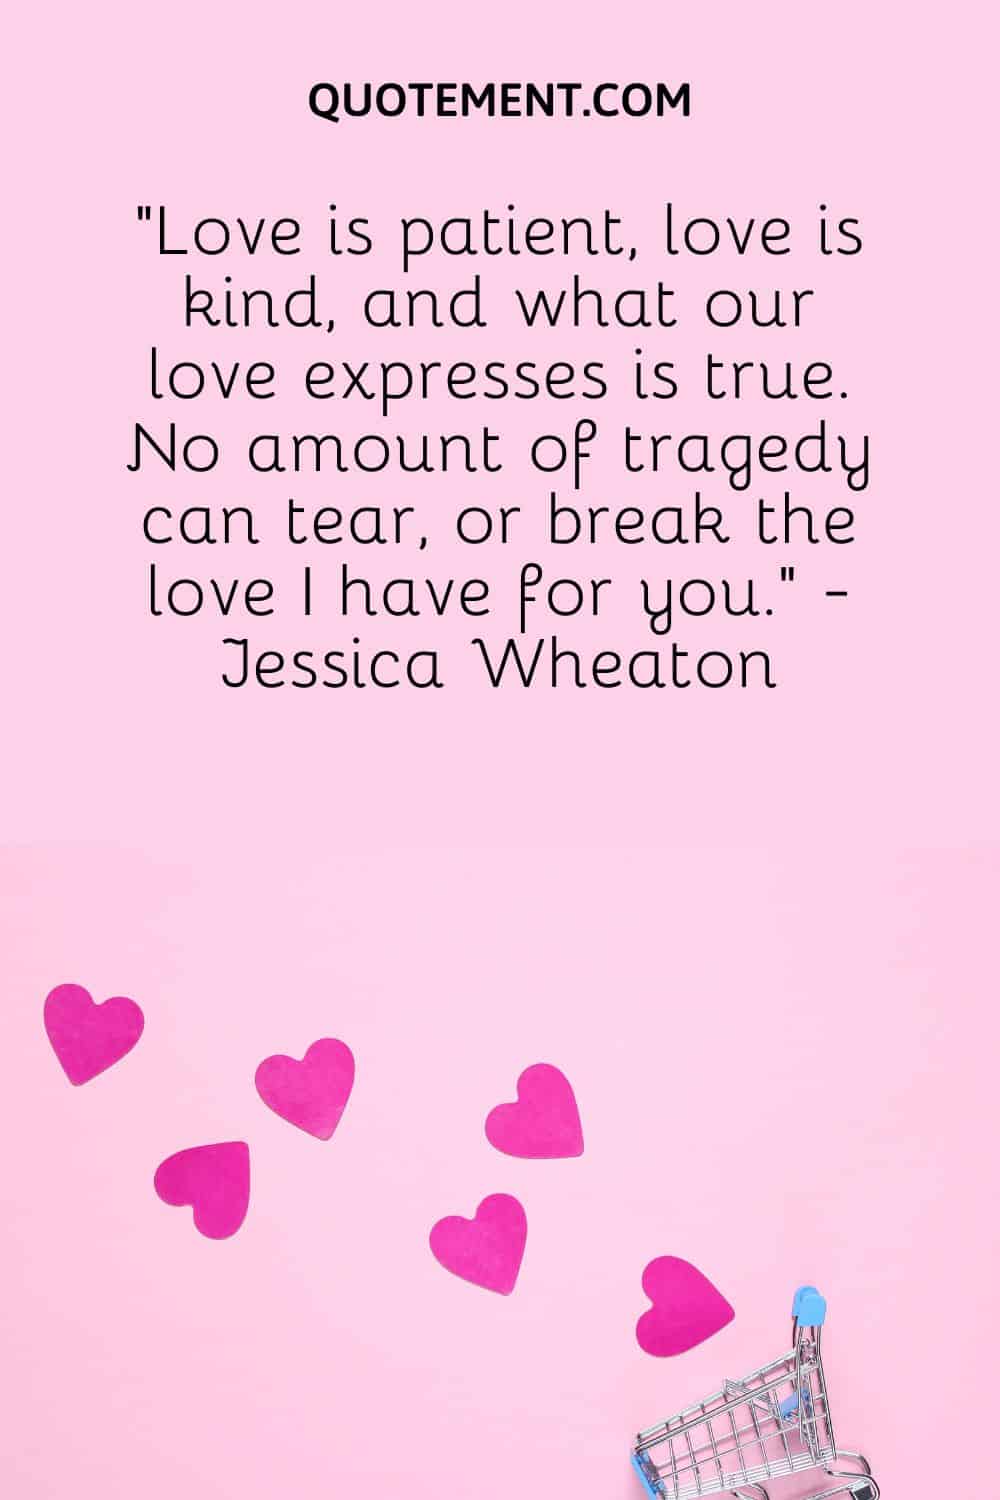 “Love is patient, love is kind, and what our love expresses is true. No amount of tragedy can tear, or break the love I have for you.” - Jessica Wheaton